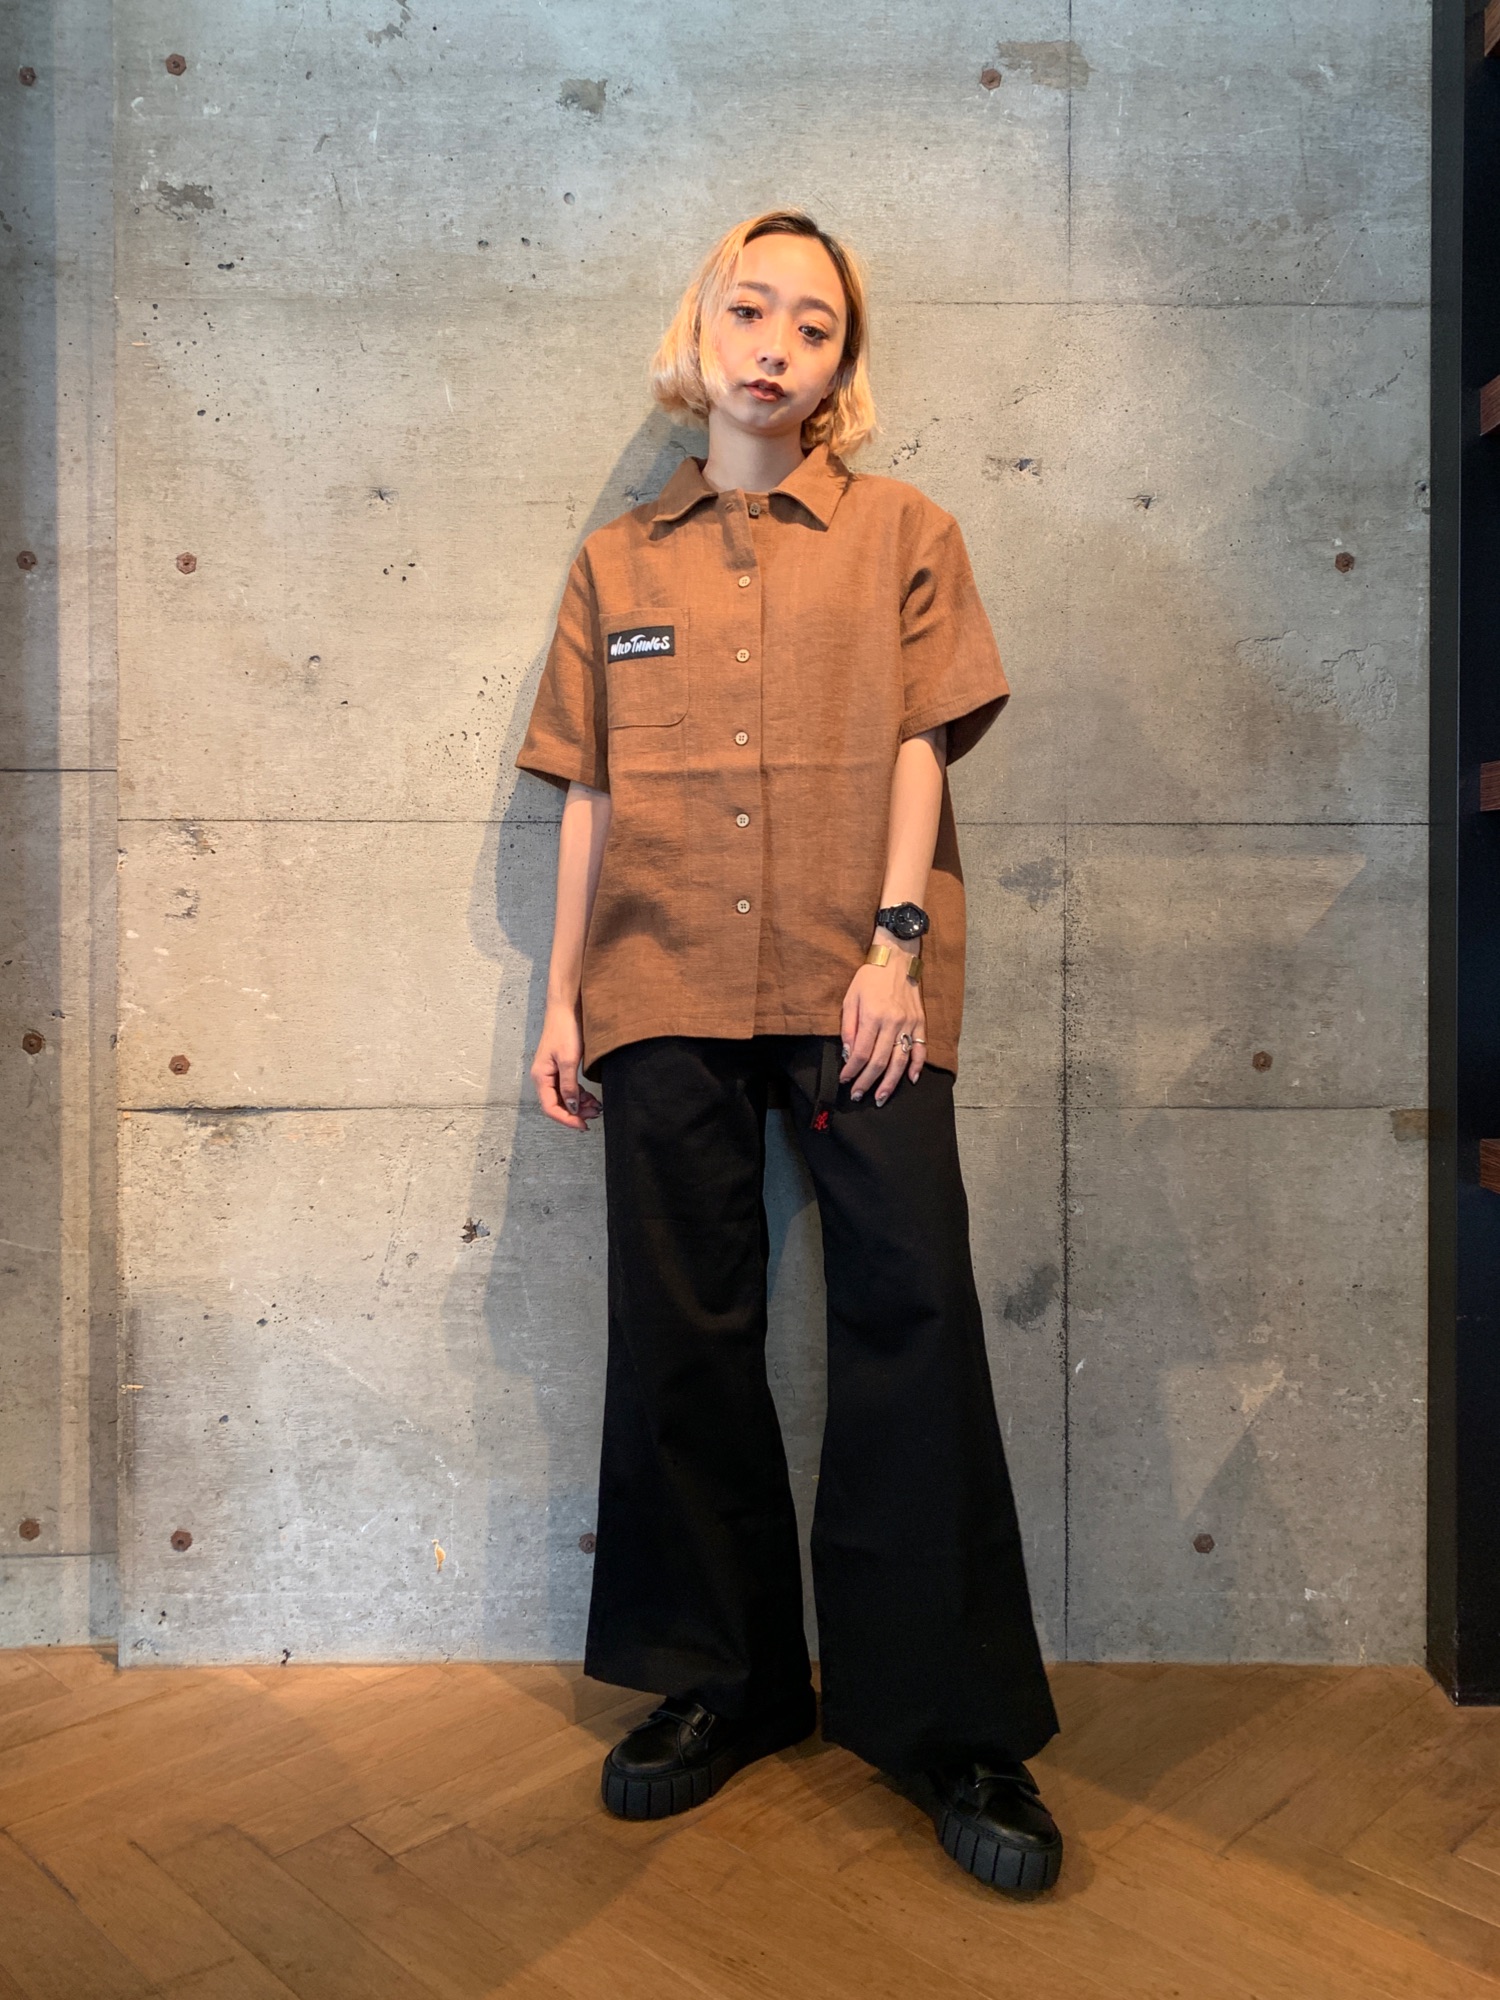 k3&co.（ケイスリーアンドコー）の「WILD THINGS×k3&co. SHIRTS ...